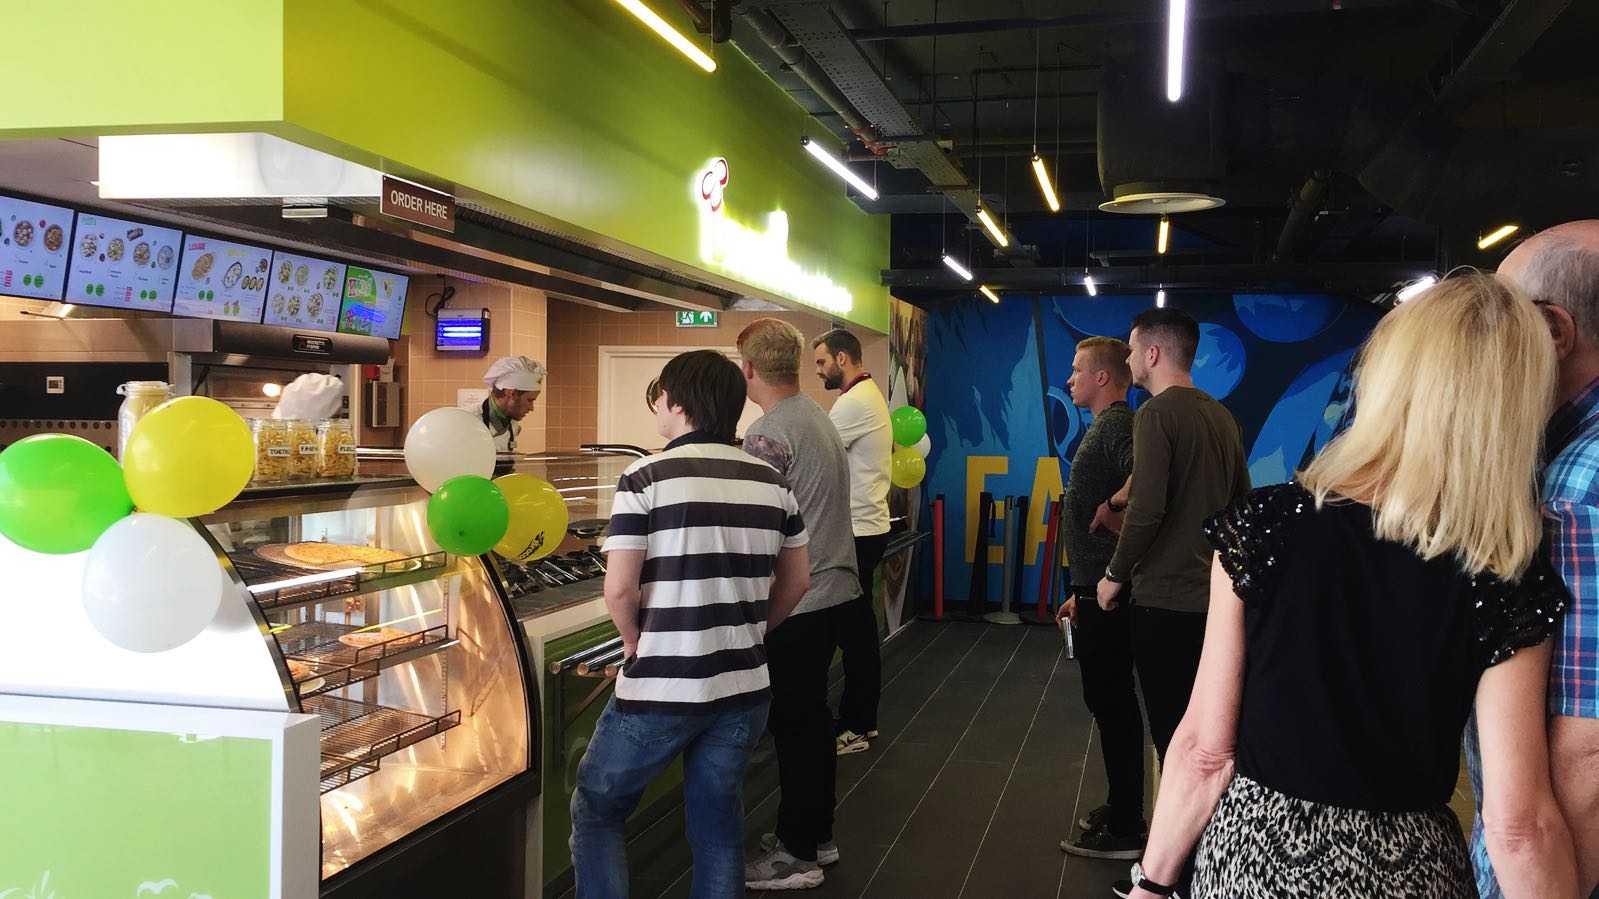 Broccoli Pizza and Pasta opens at The Crossing, Swindon Town Centre